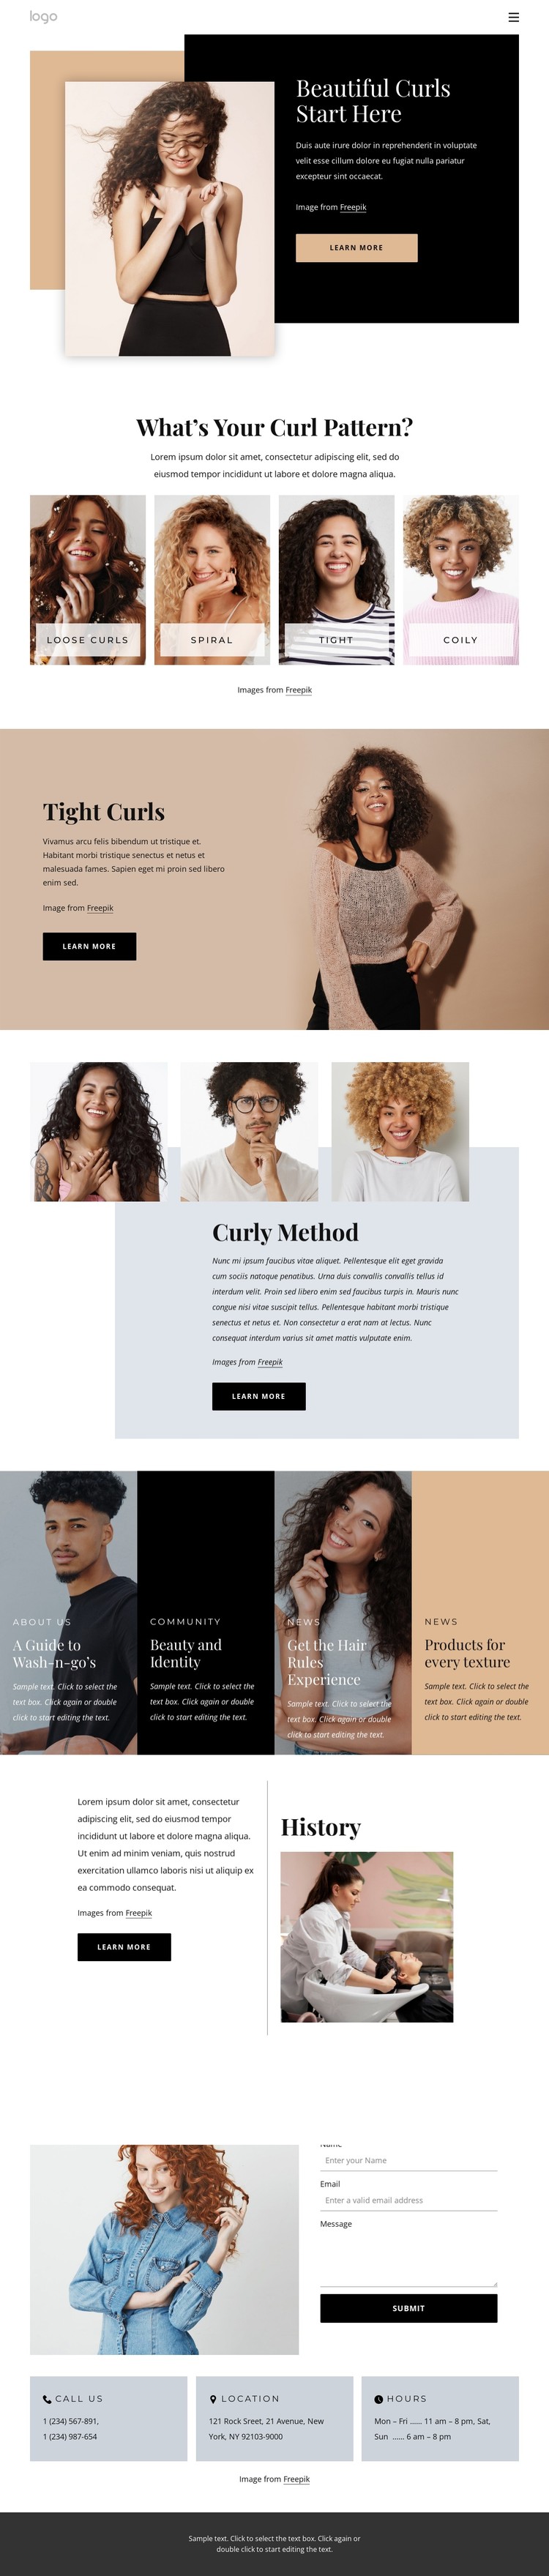 Bring out the best in your curls CSS Template